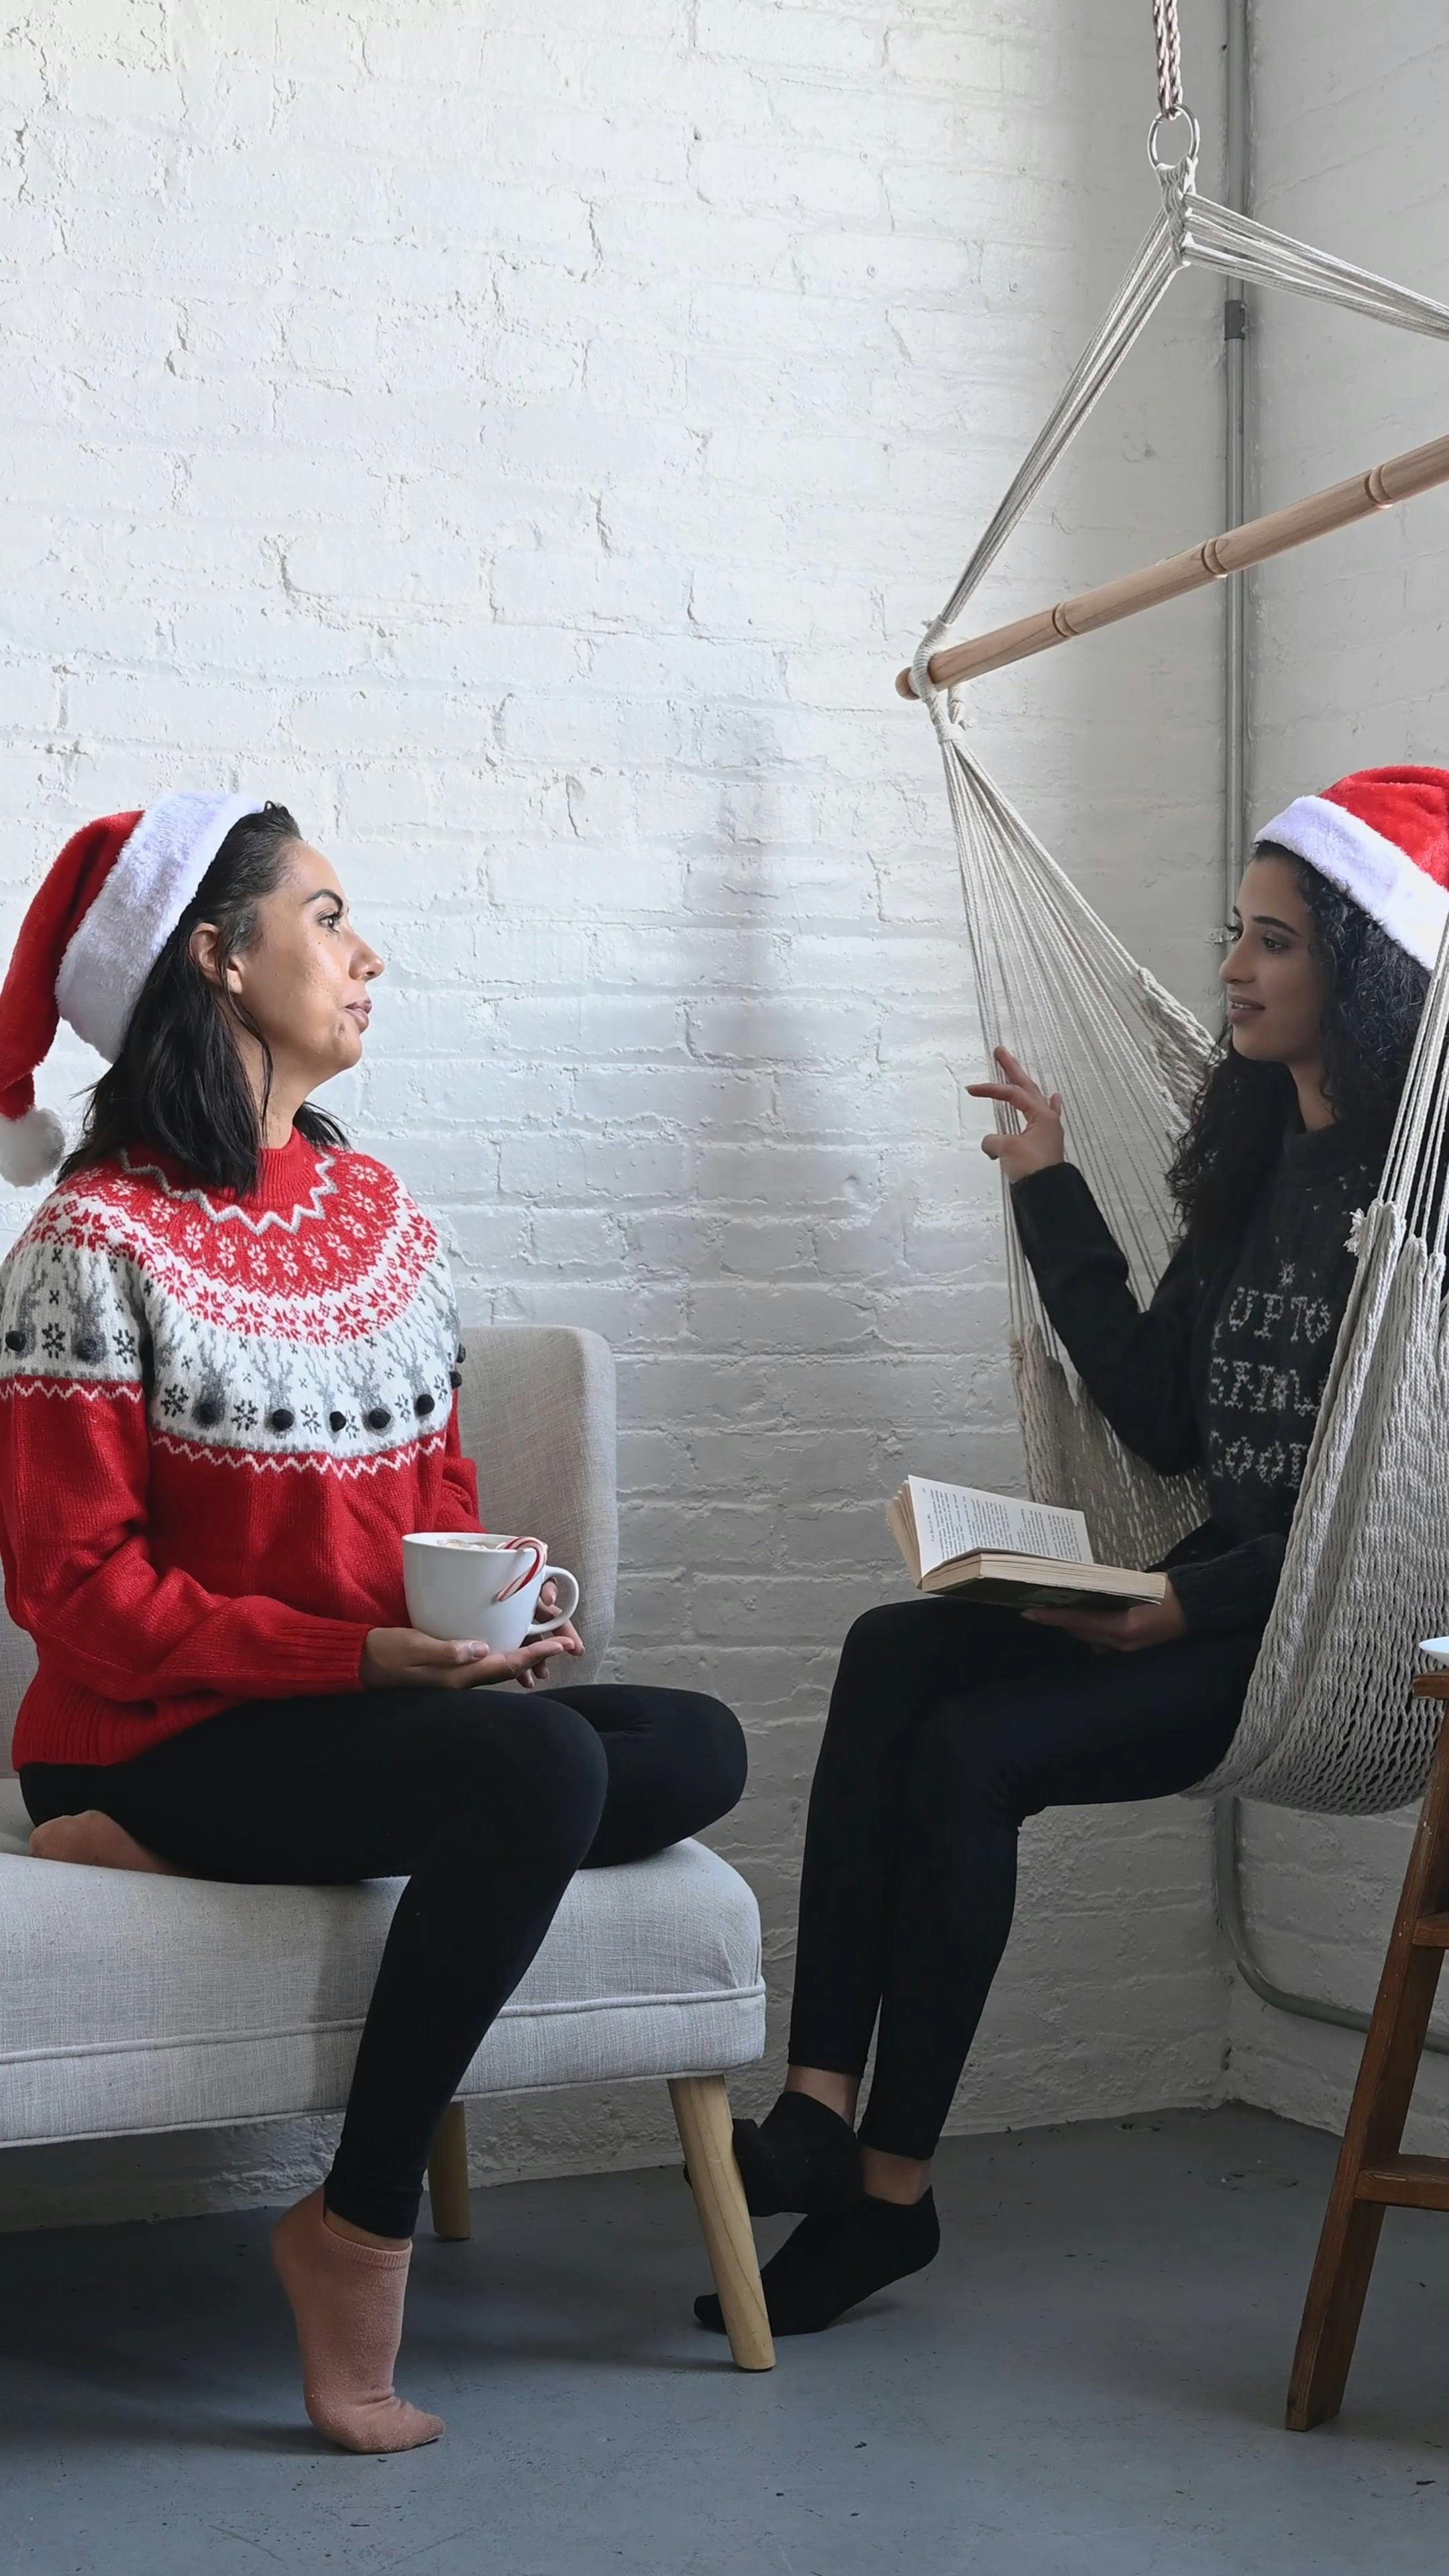 Women Dressed In Christmas Costume While Talking · Free Stock Video